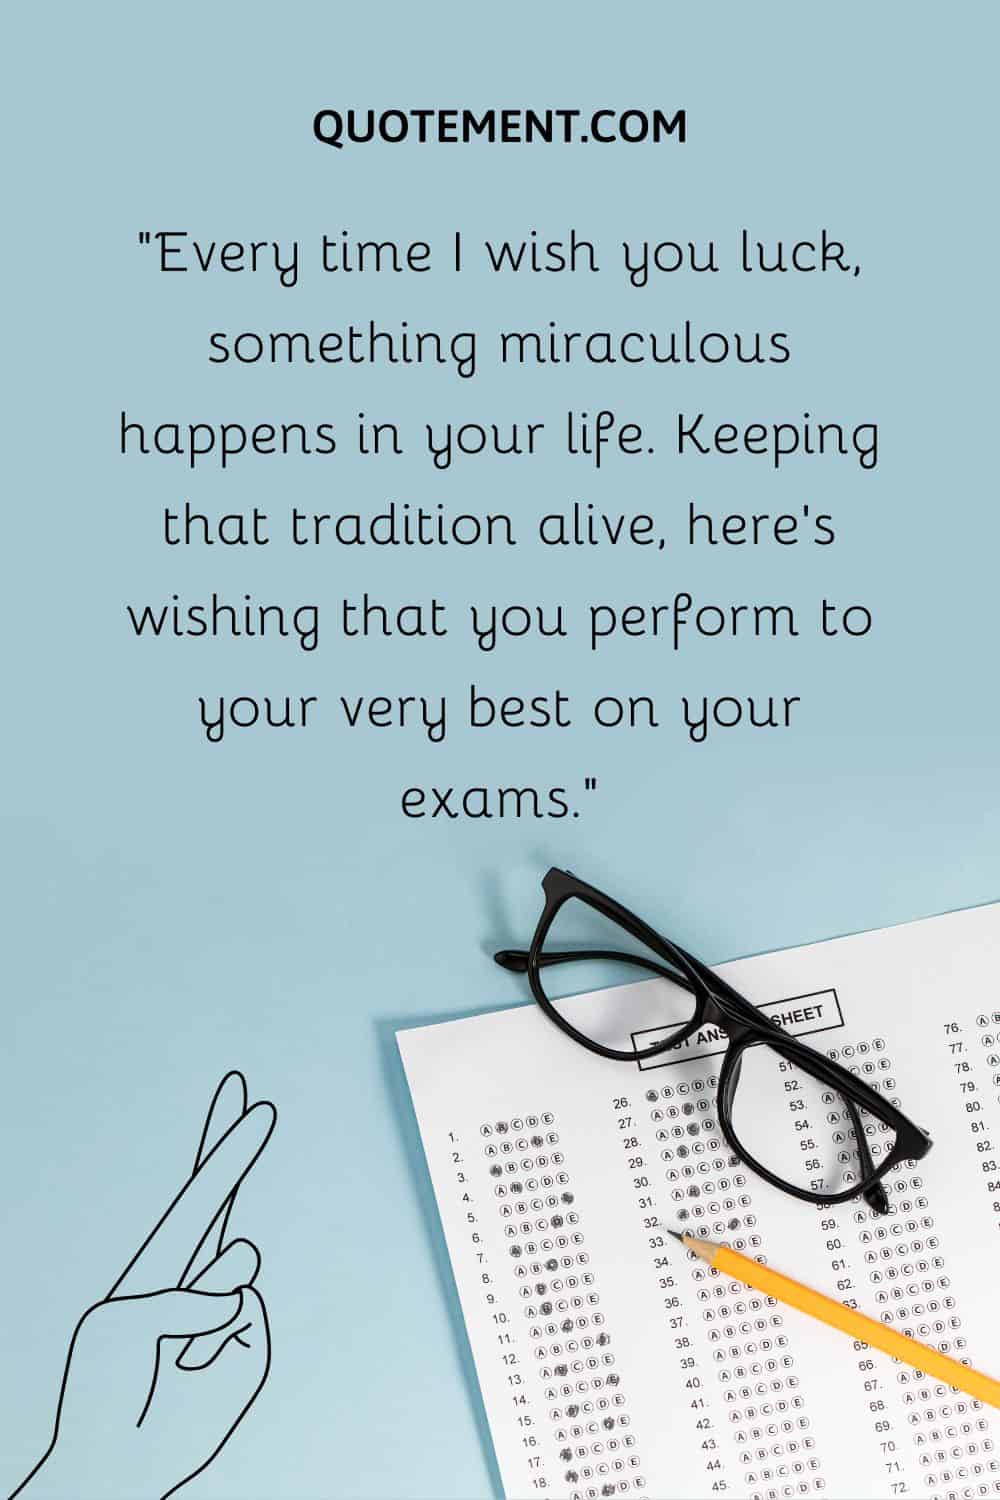 Every time I wish you luck, something miraculous happens in your life